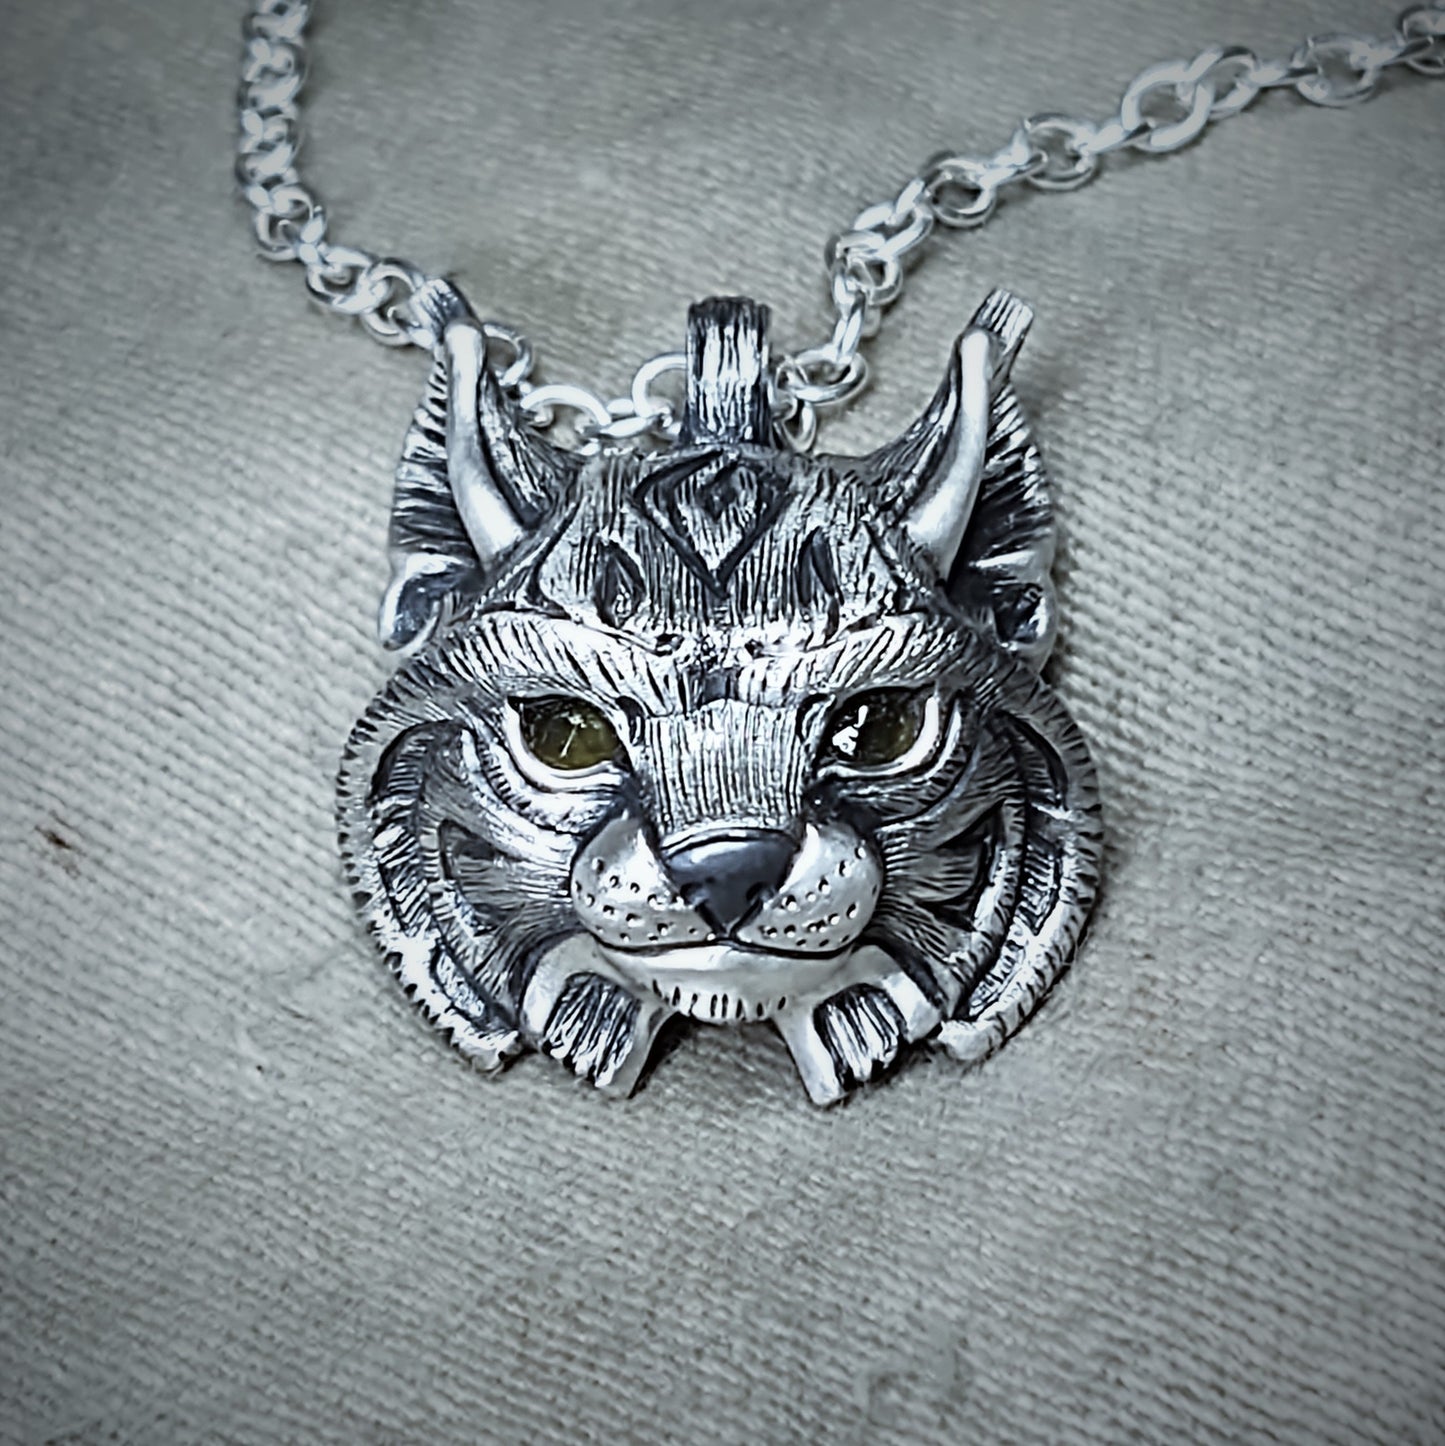 Mid-size Lynx Necklace. Sterling silver lynx's head pendant with natural gemstone eyes and a solid silver chain. Hand made to order. © Adrian Ashley